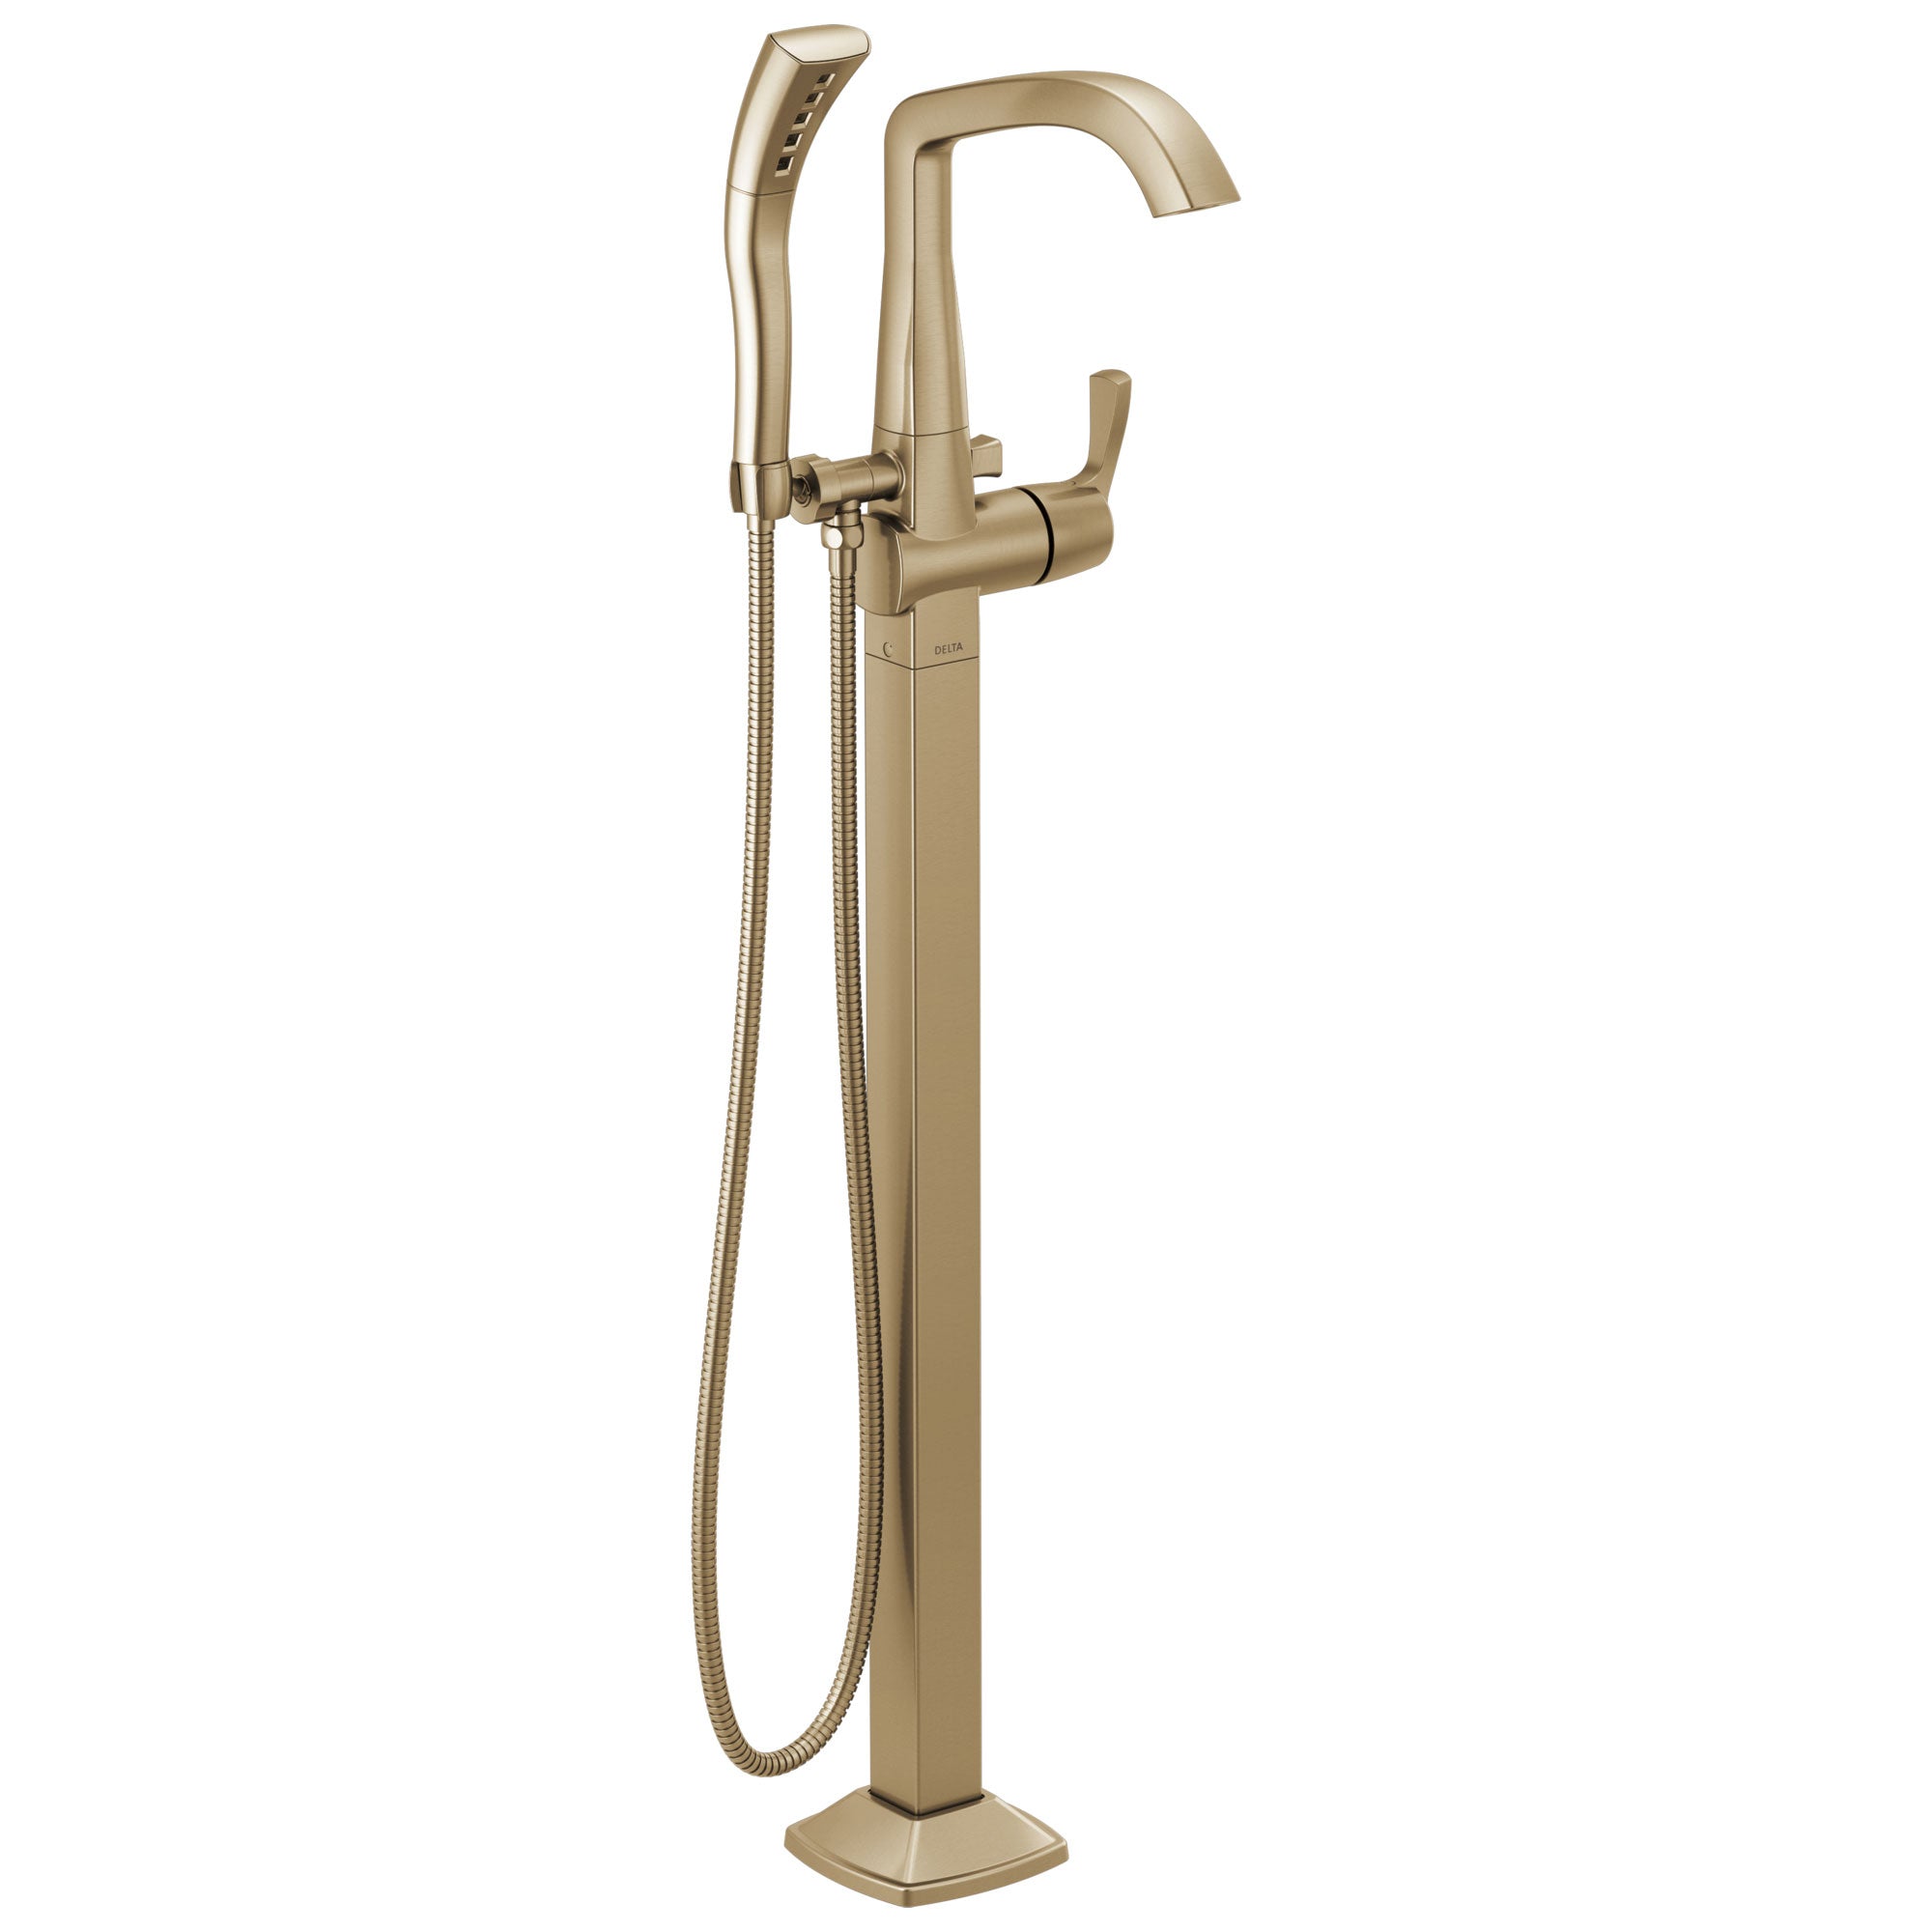 Delta Stryke Champagne Bronze Finish Single Lever Handle Floor Mount Tub Filler Faucet with Hand Sprayer Includes Rough-in Valve D3037V